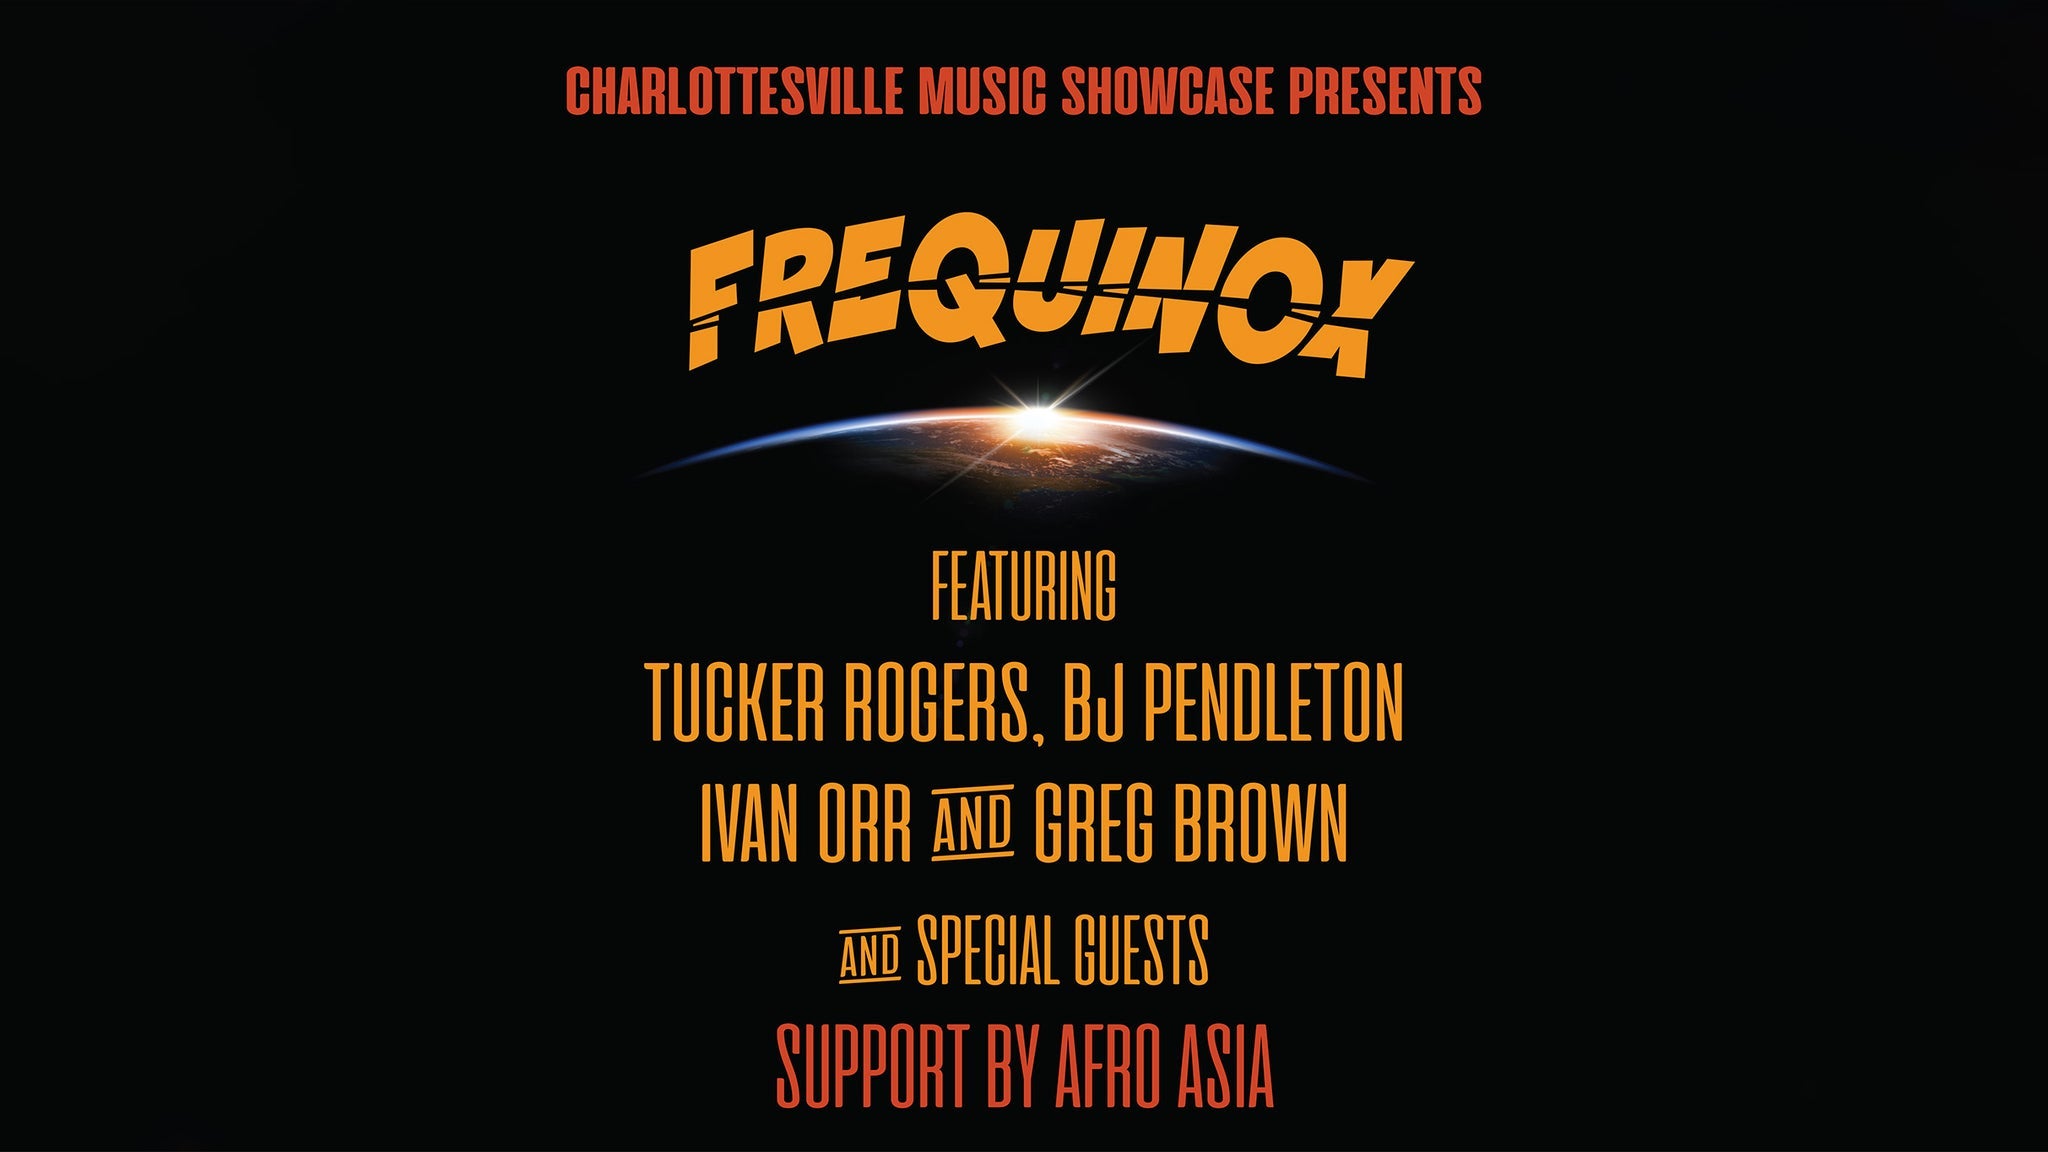 Charlottesville Music Showcase Presents Frequinox with Afro Asia